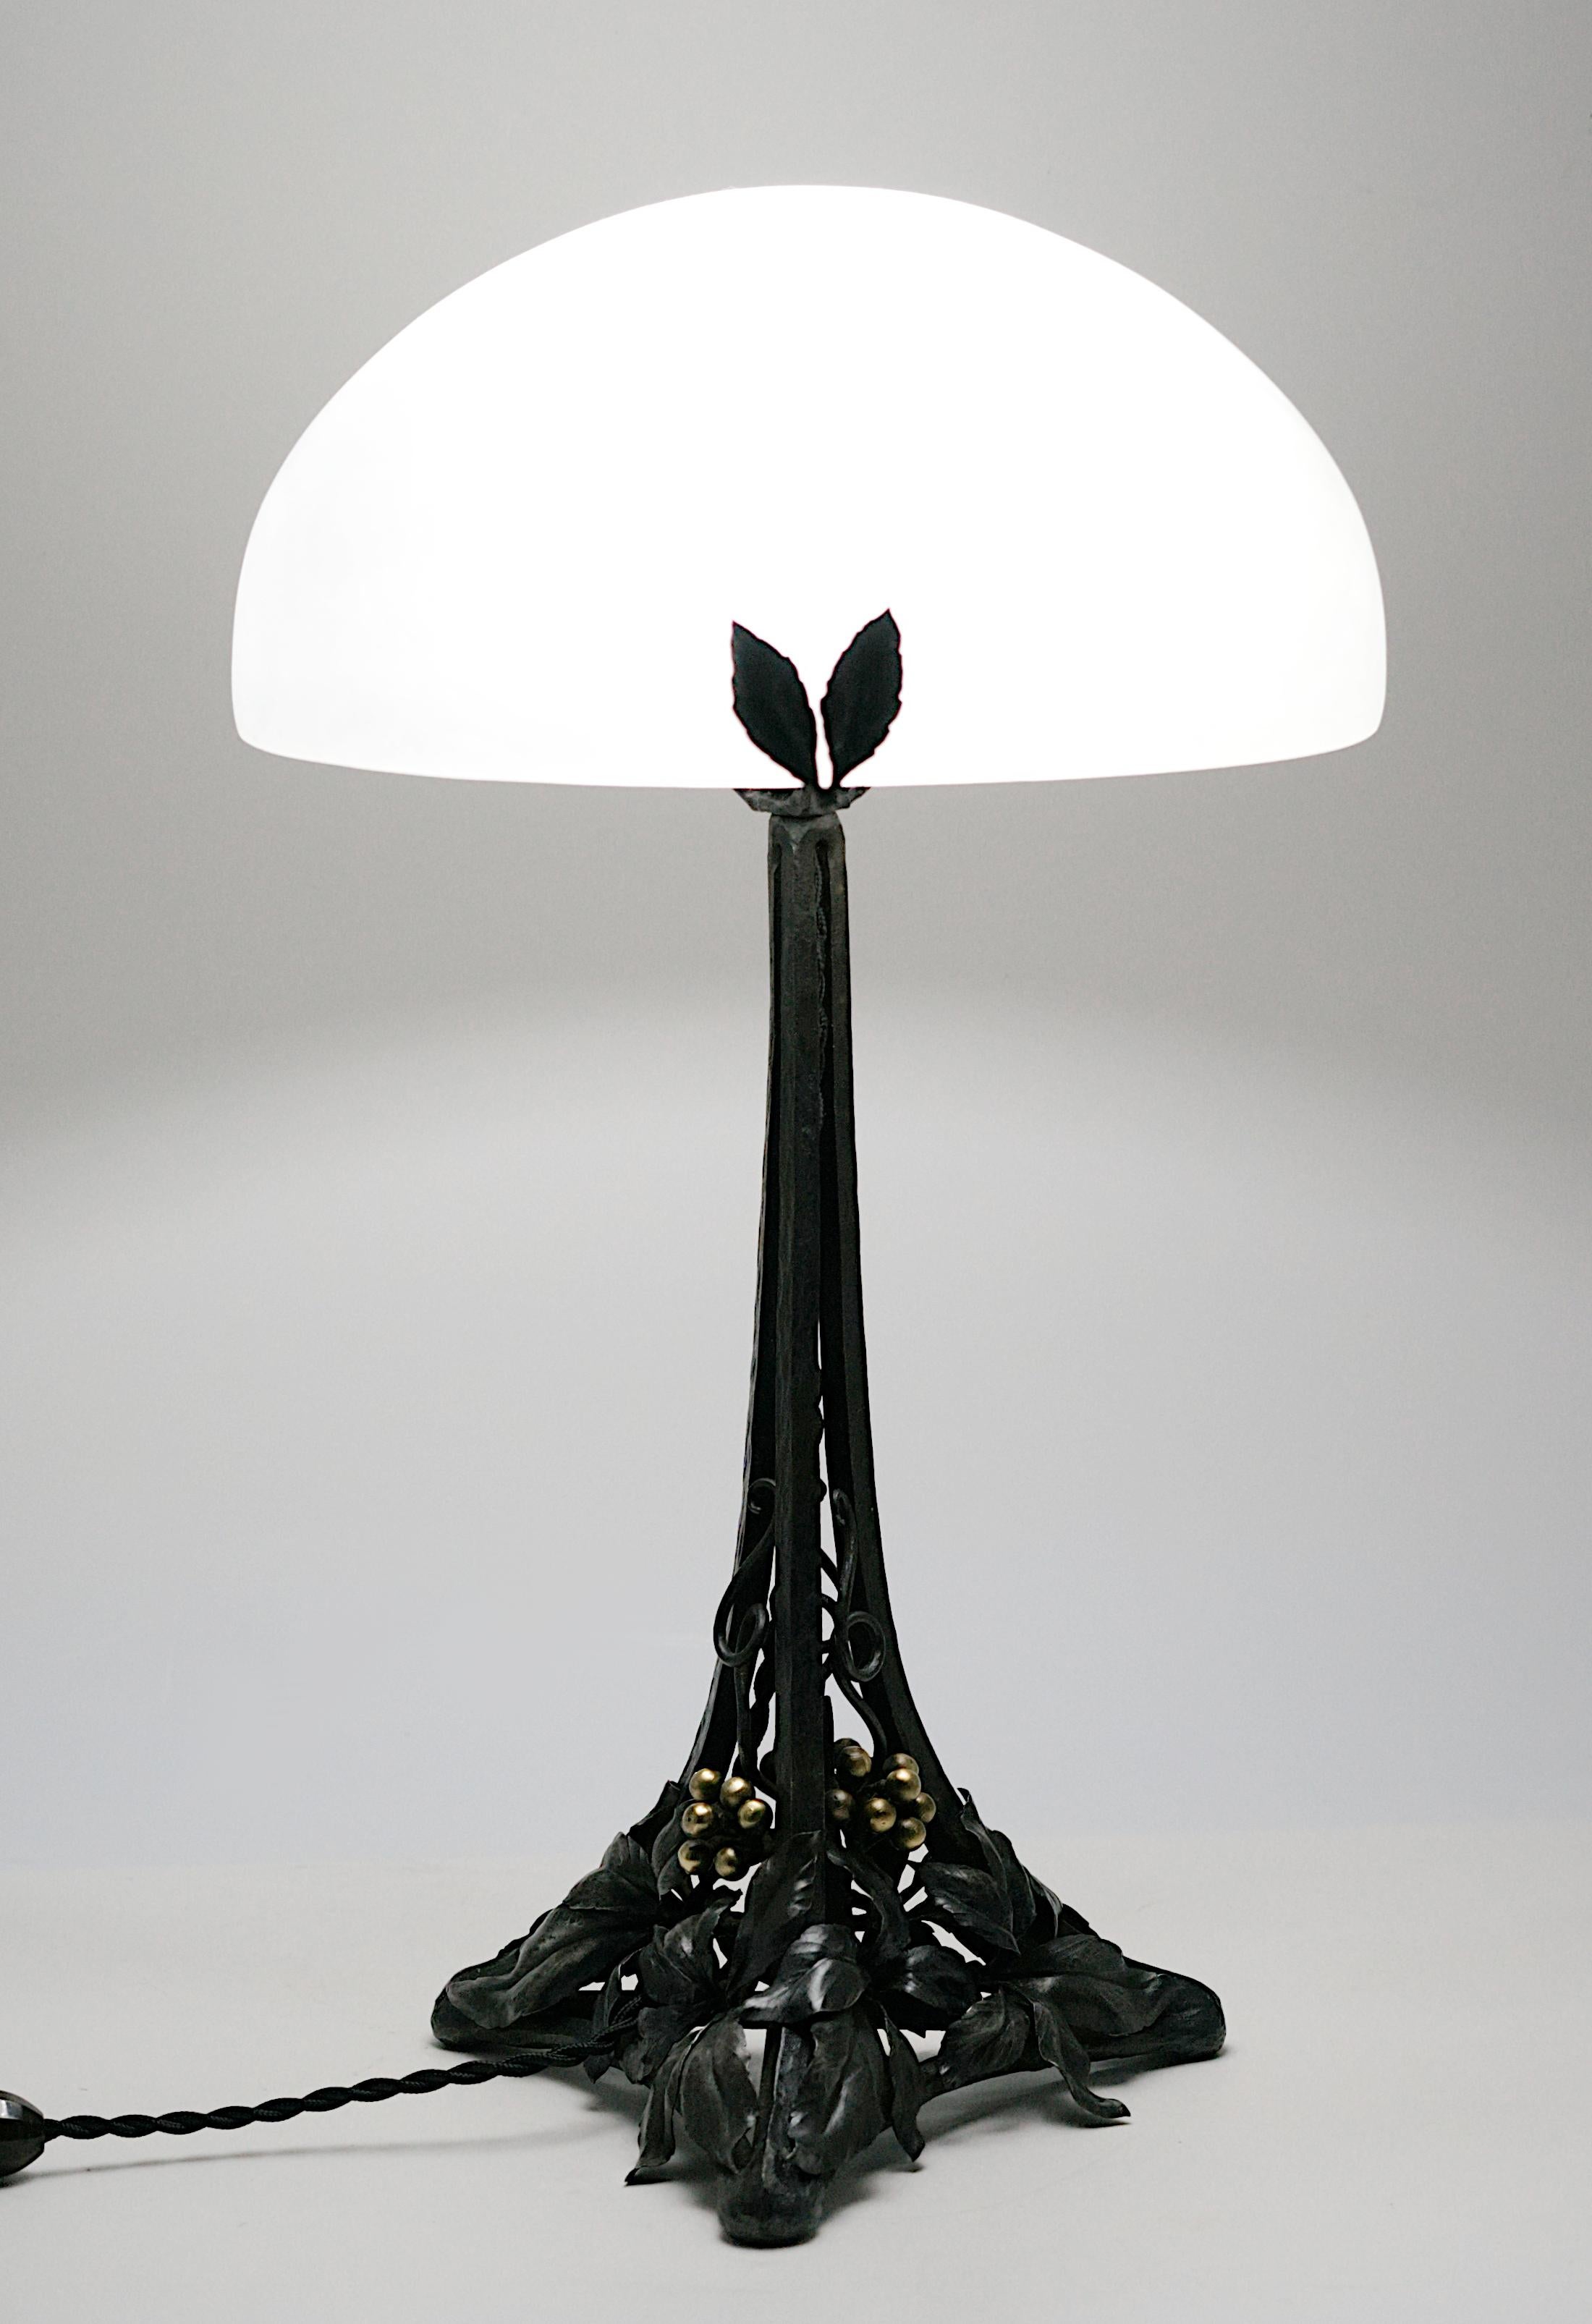 French Art Deco table lamp, France, 1920s. The elegant base comes with its alabaster shade. Height : 16